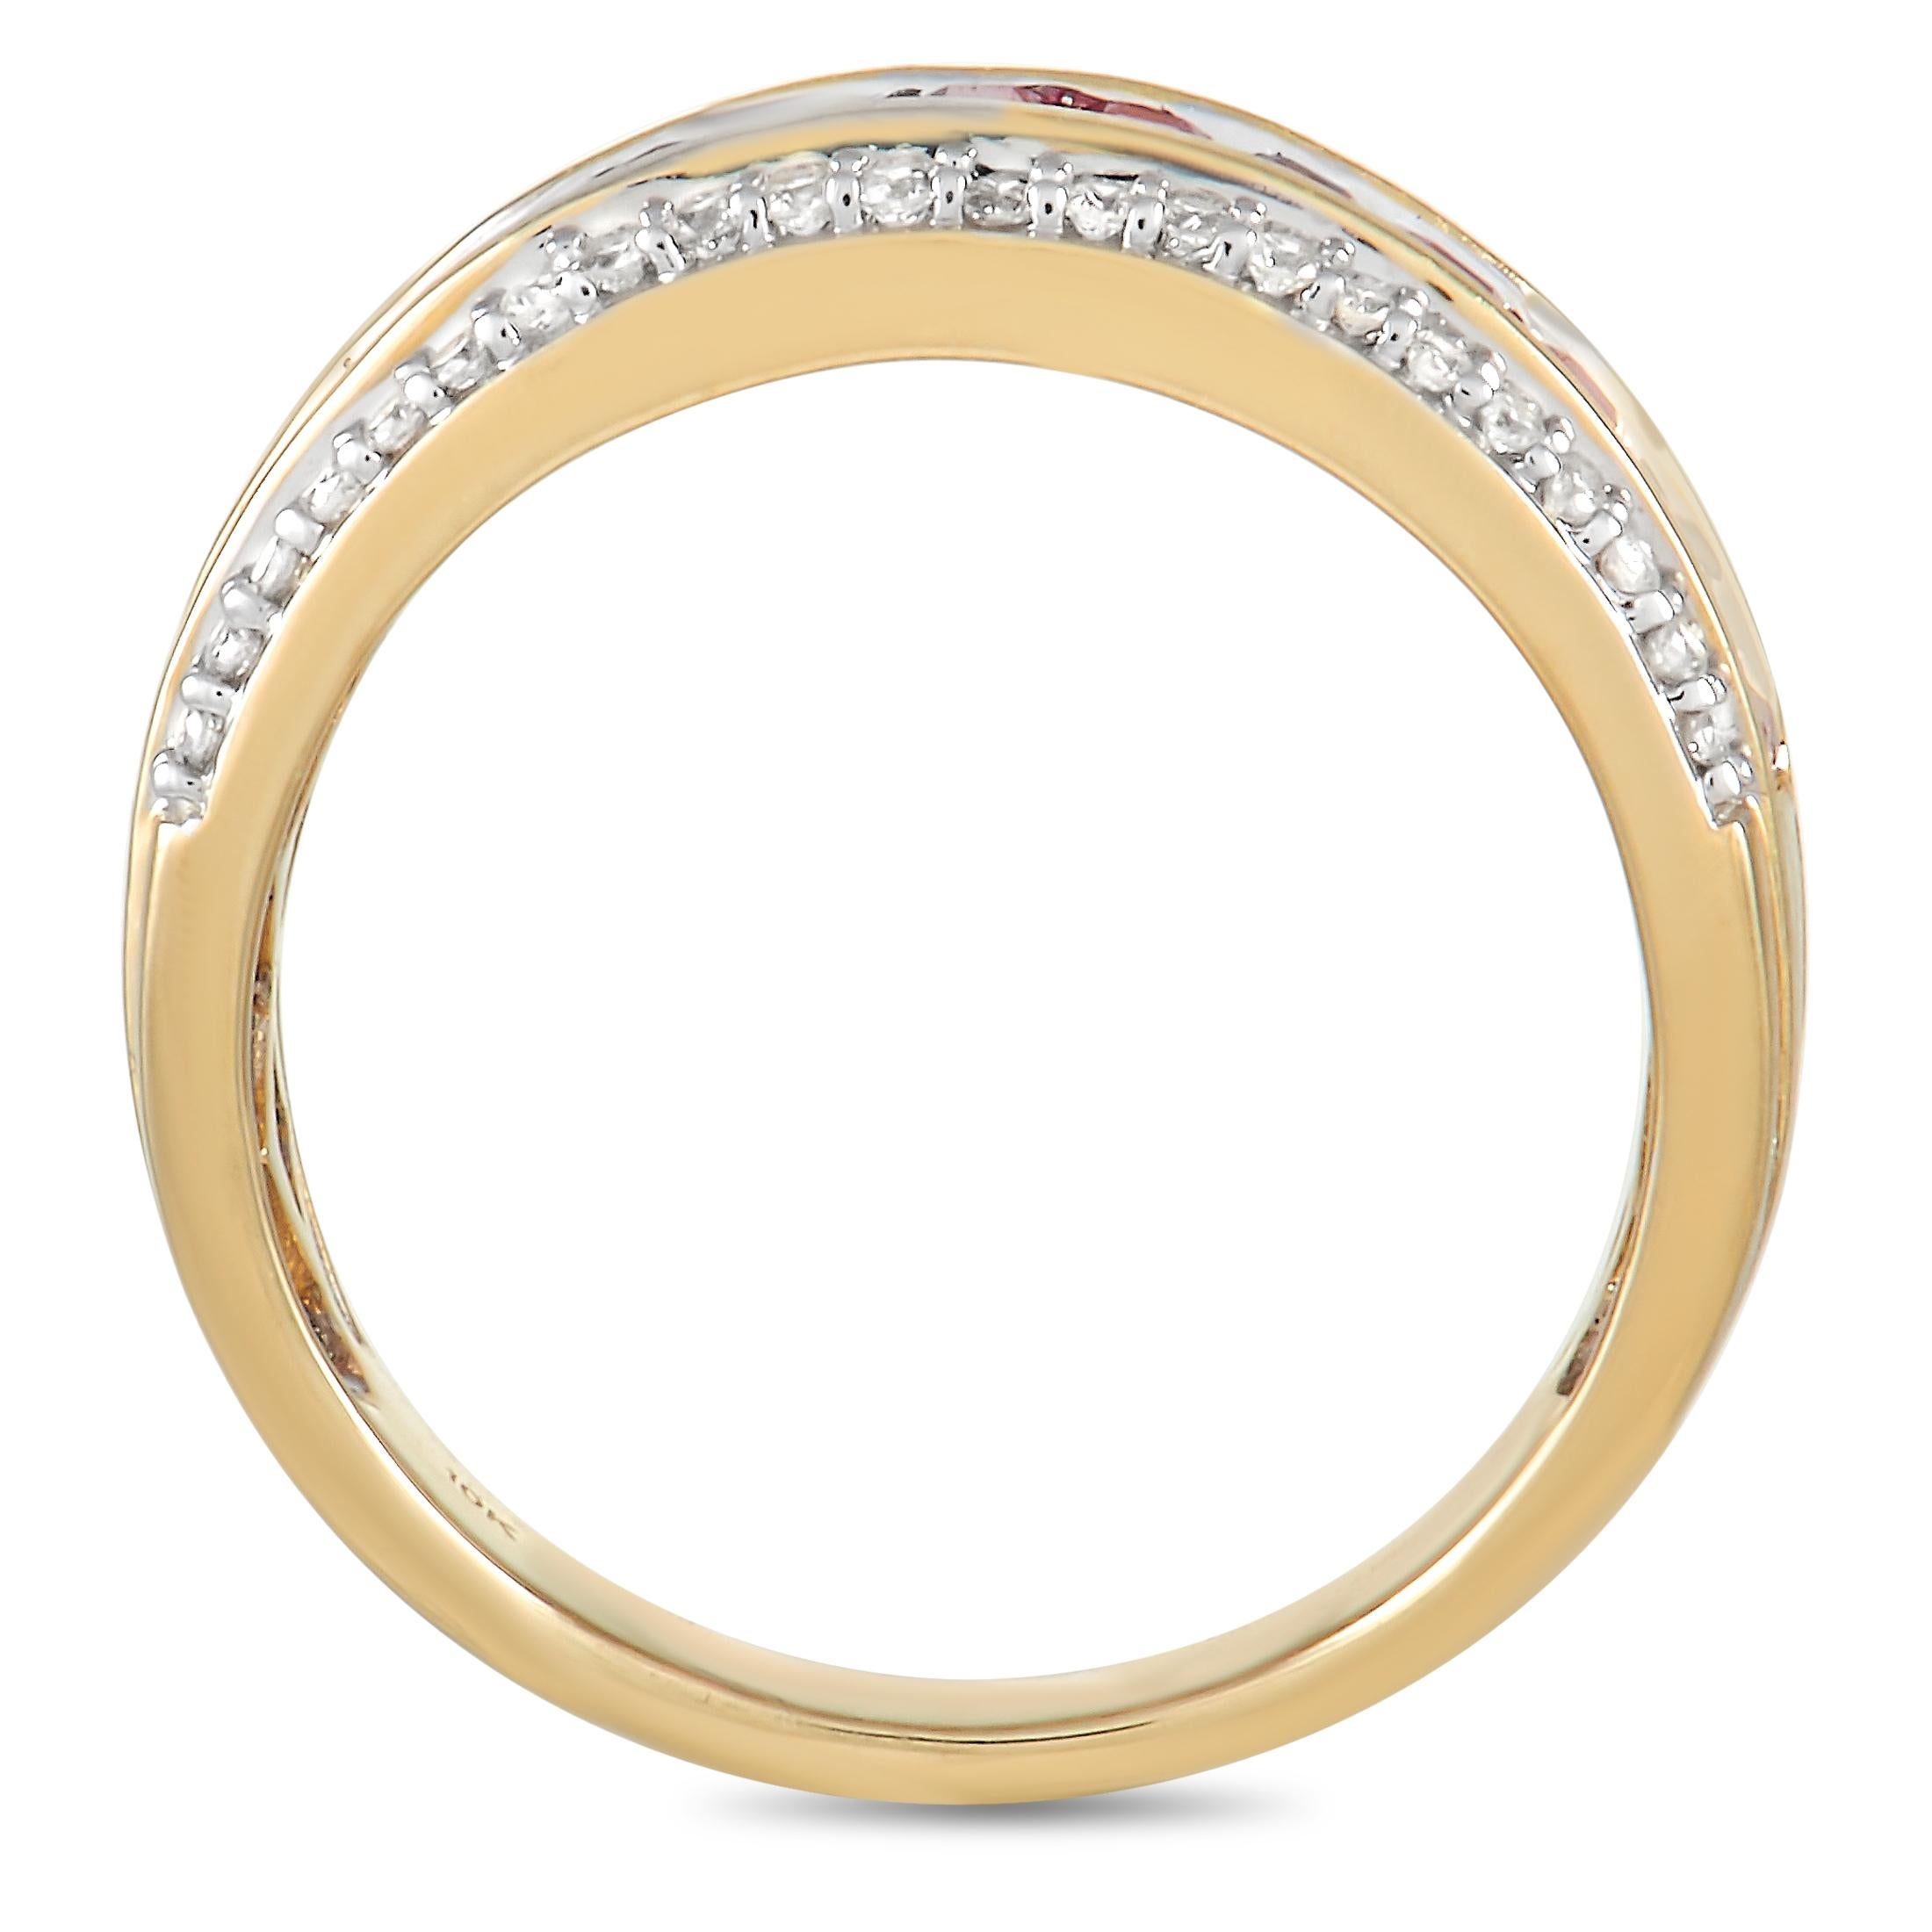 Make a statement with this dramatic half-eternity ring. Fashioned from 10k yellow gold is a 5mm band with a top height measuring 3mm. The channel of rectangular step cut rubies sitting at the center of the band is accompanied by two rows of white